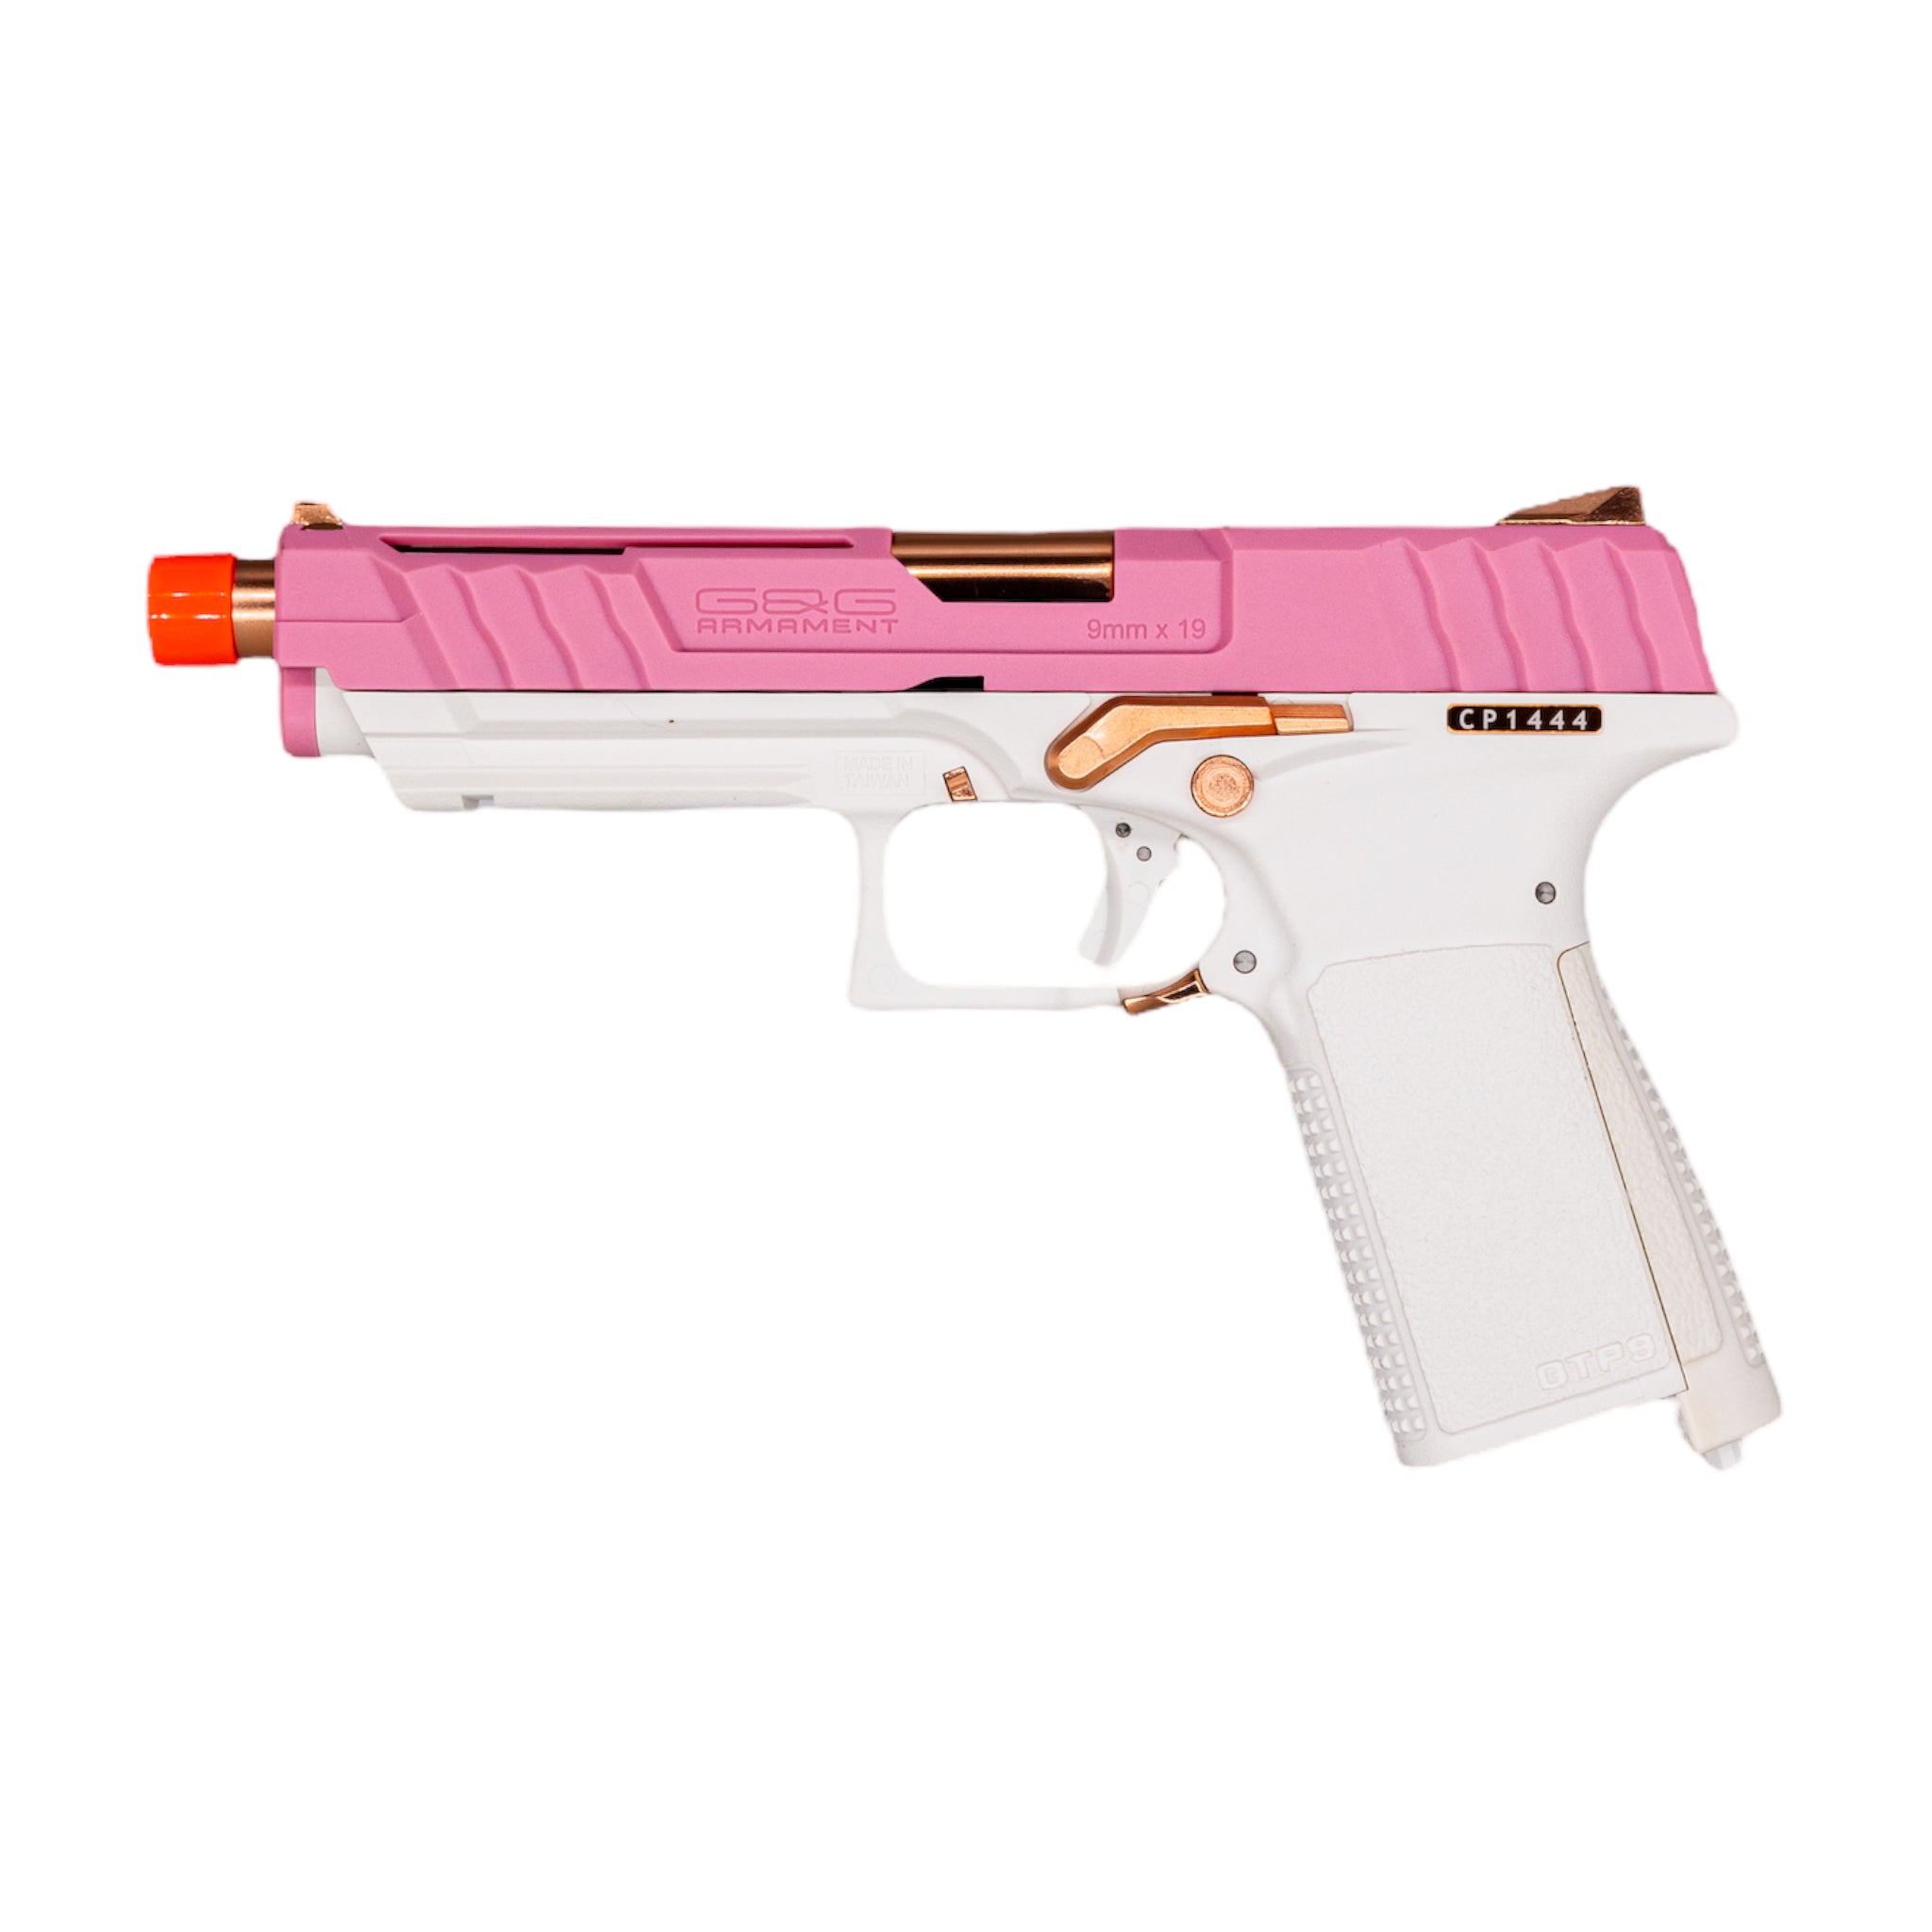 G&G GTP9 Gas-Blowback Airsoft Pistol (Rose Gold), SS Airsoft